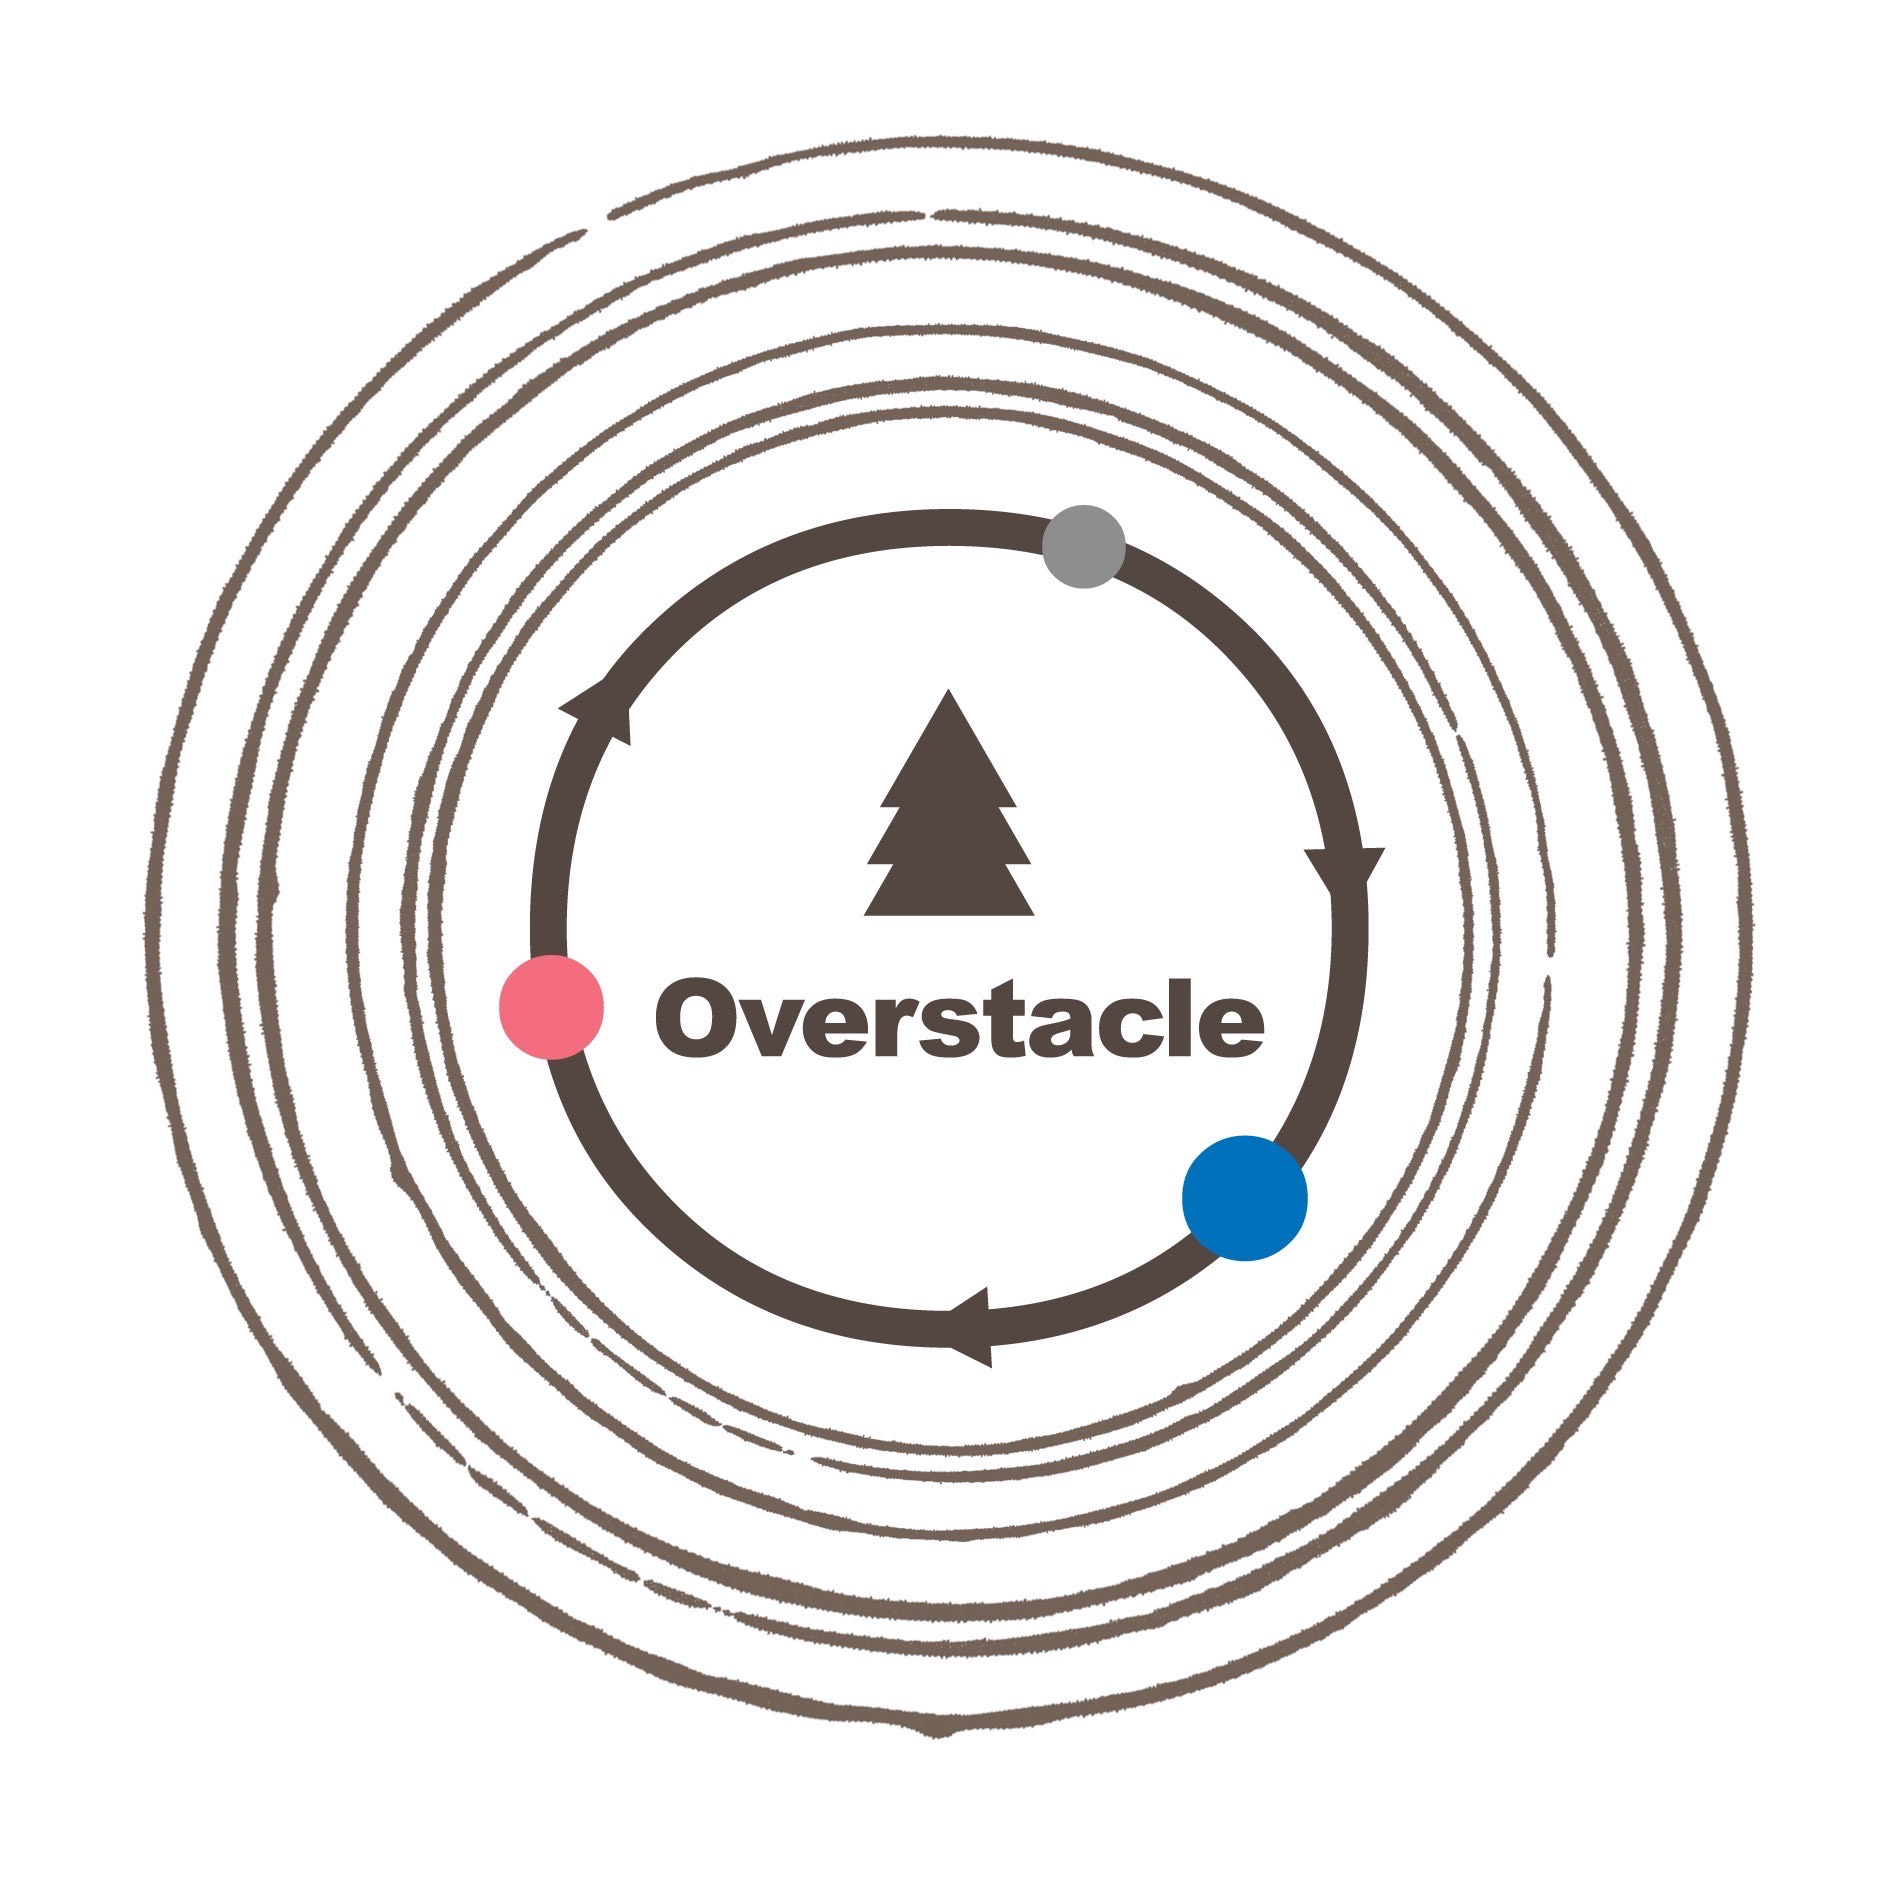 Overstacle